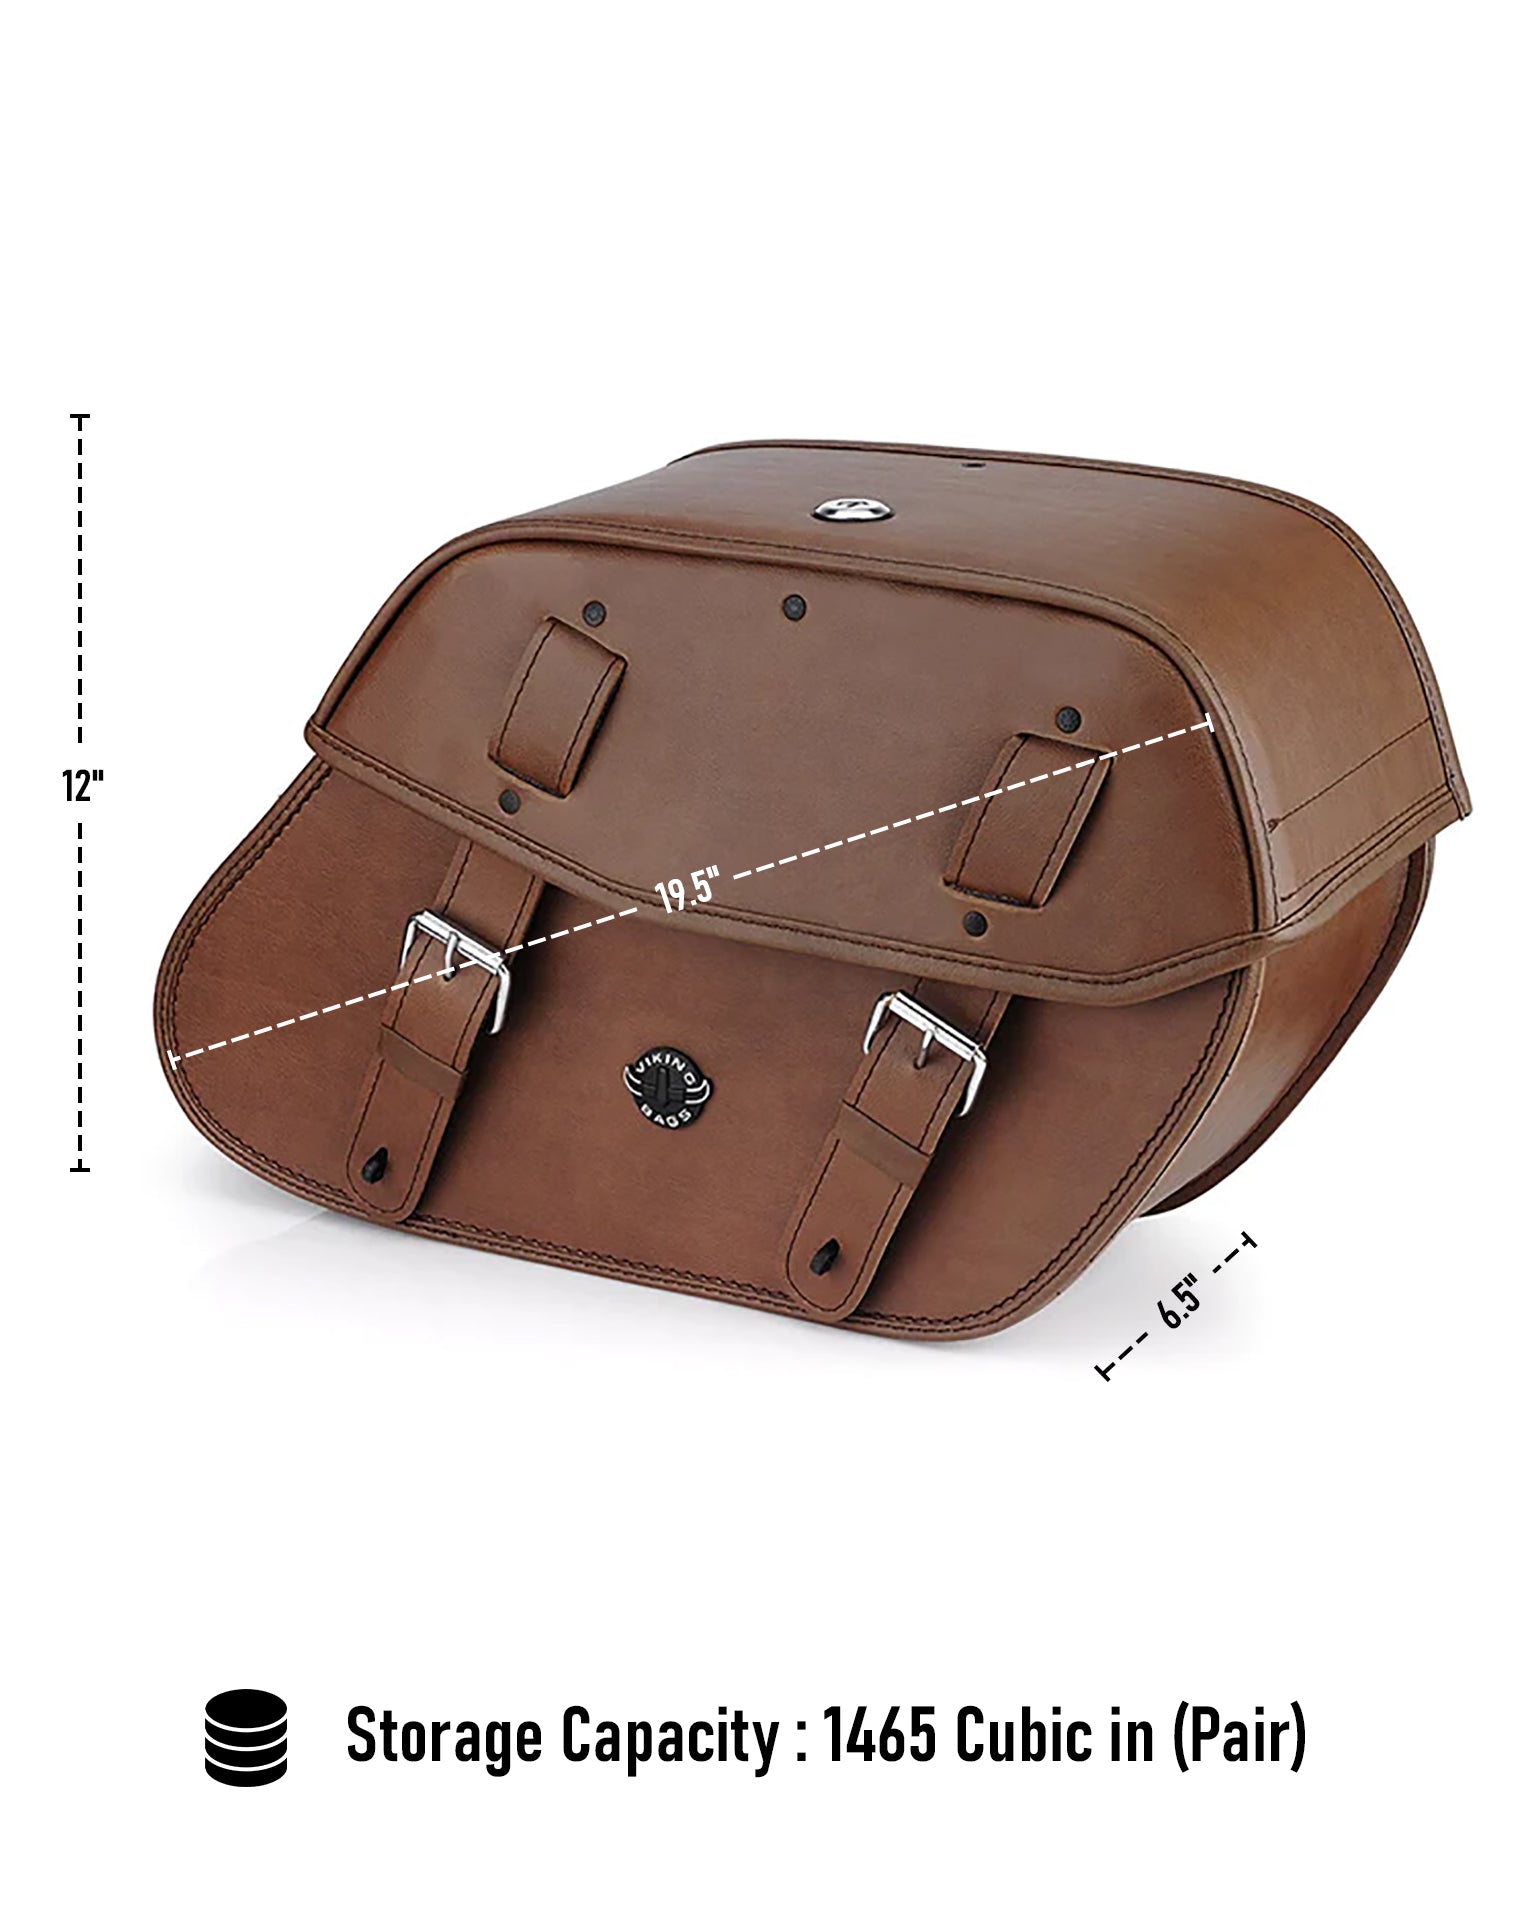 Viking Odin Brown Large Honda Vtx 1800 N Leather Motorcycle Saddlebags Can Store Your Ridings Gears